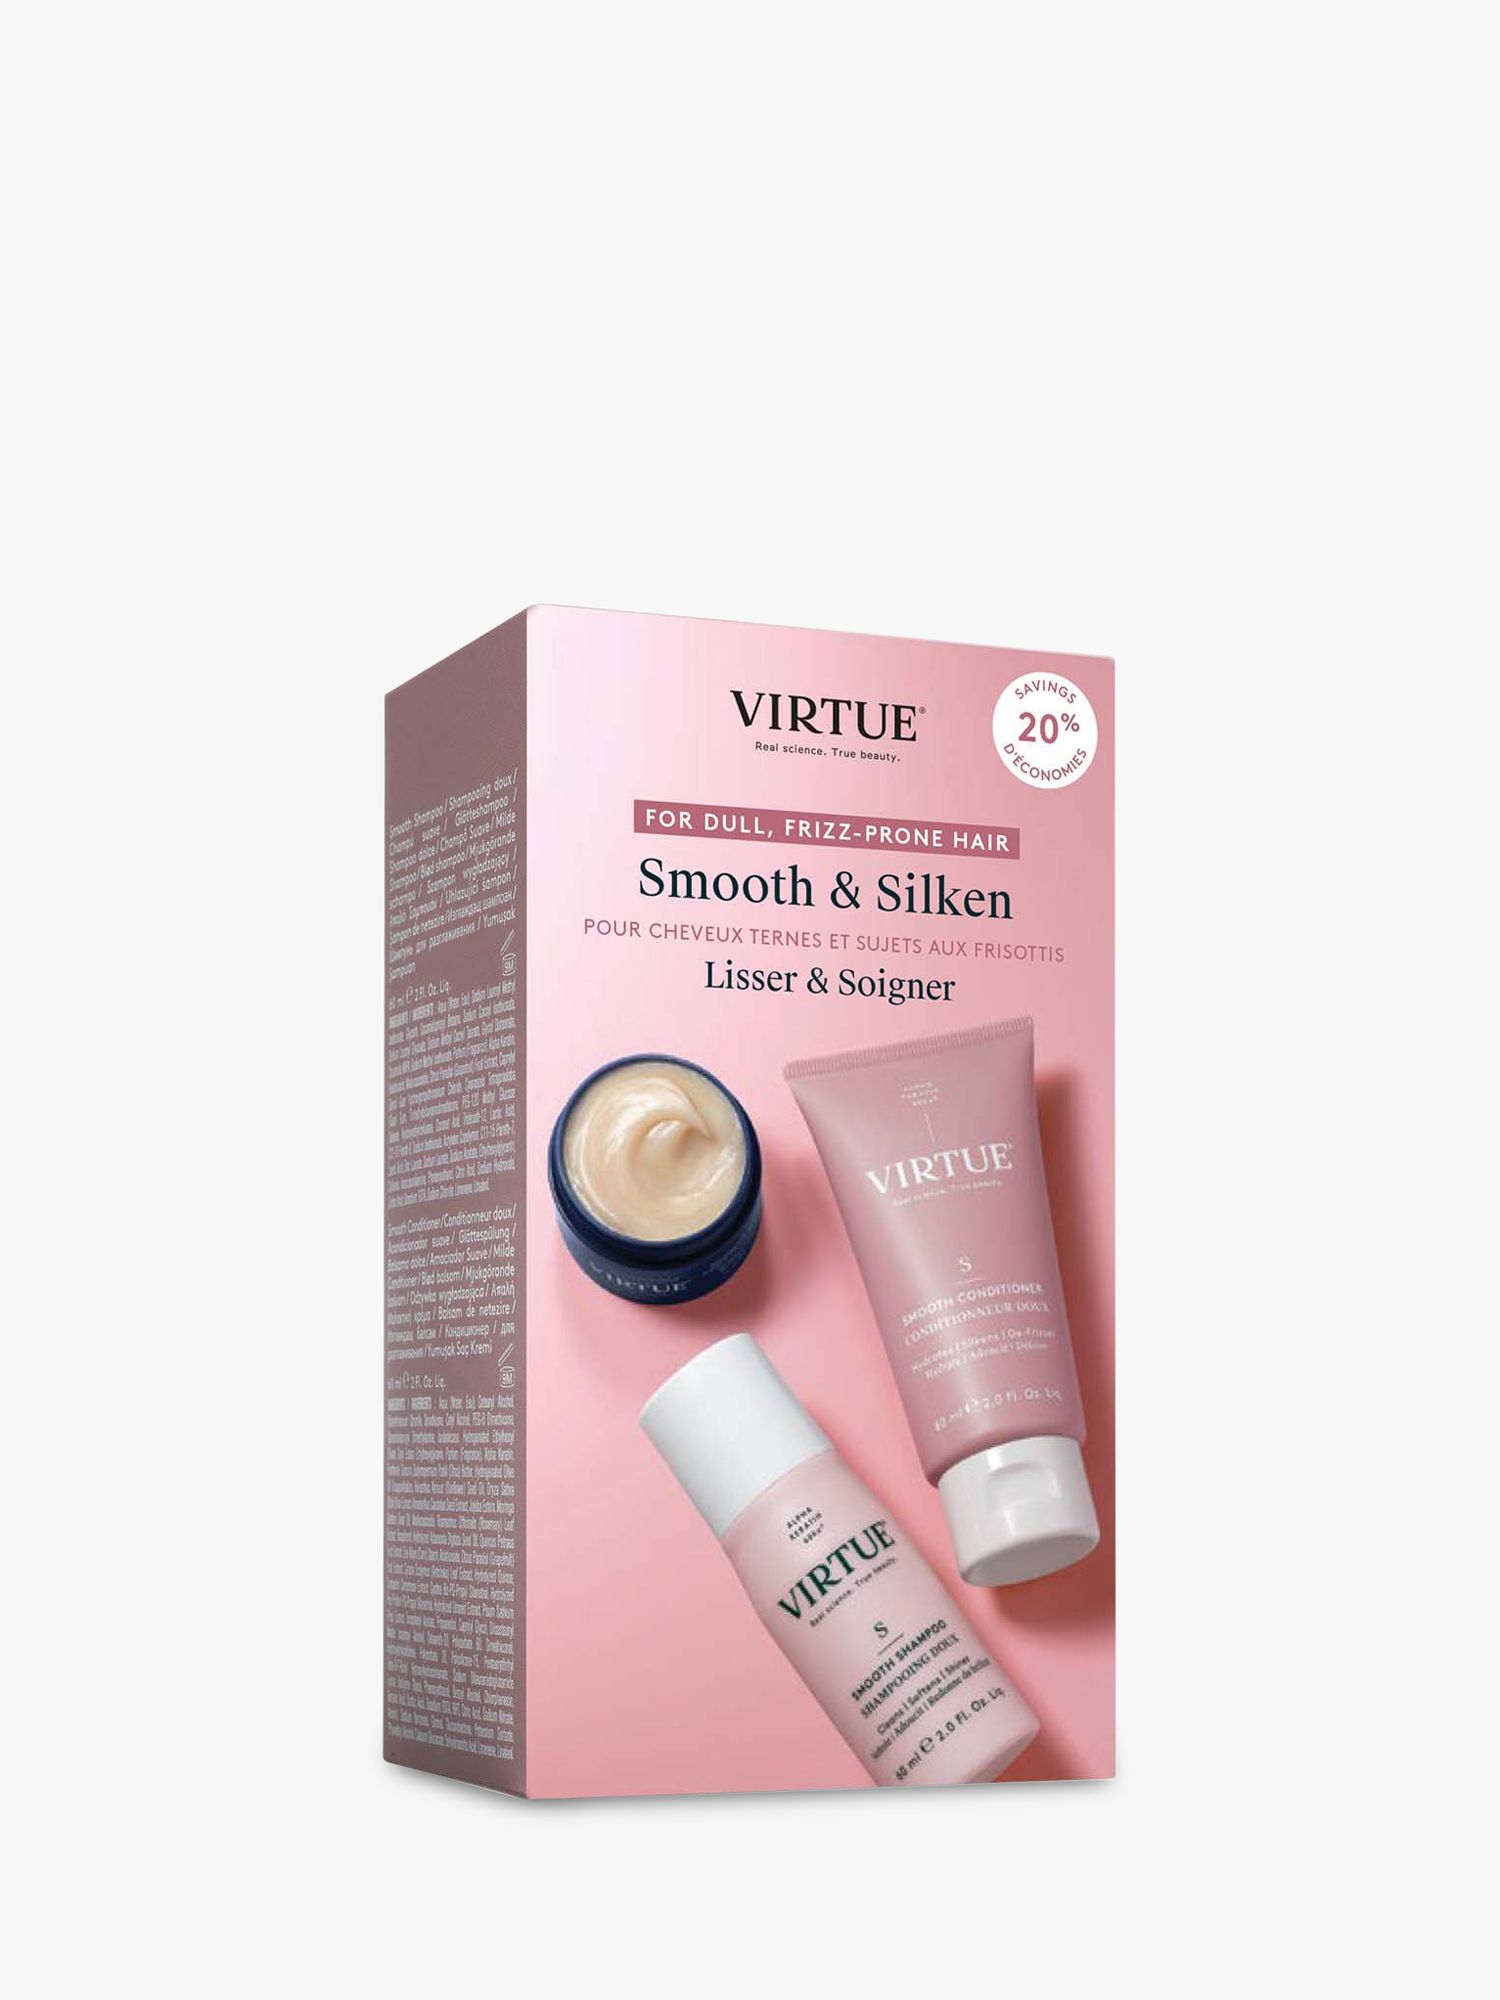 Virtue Smooth Discovery Haircare Gift Set 3